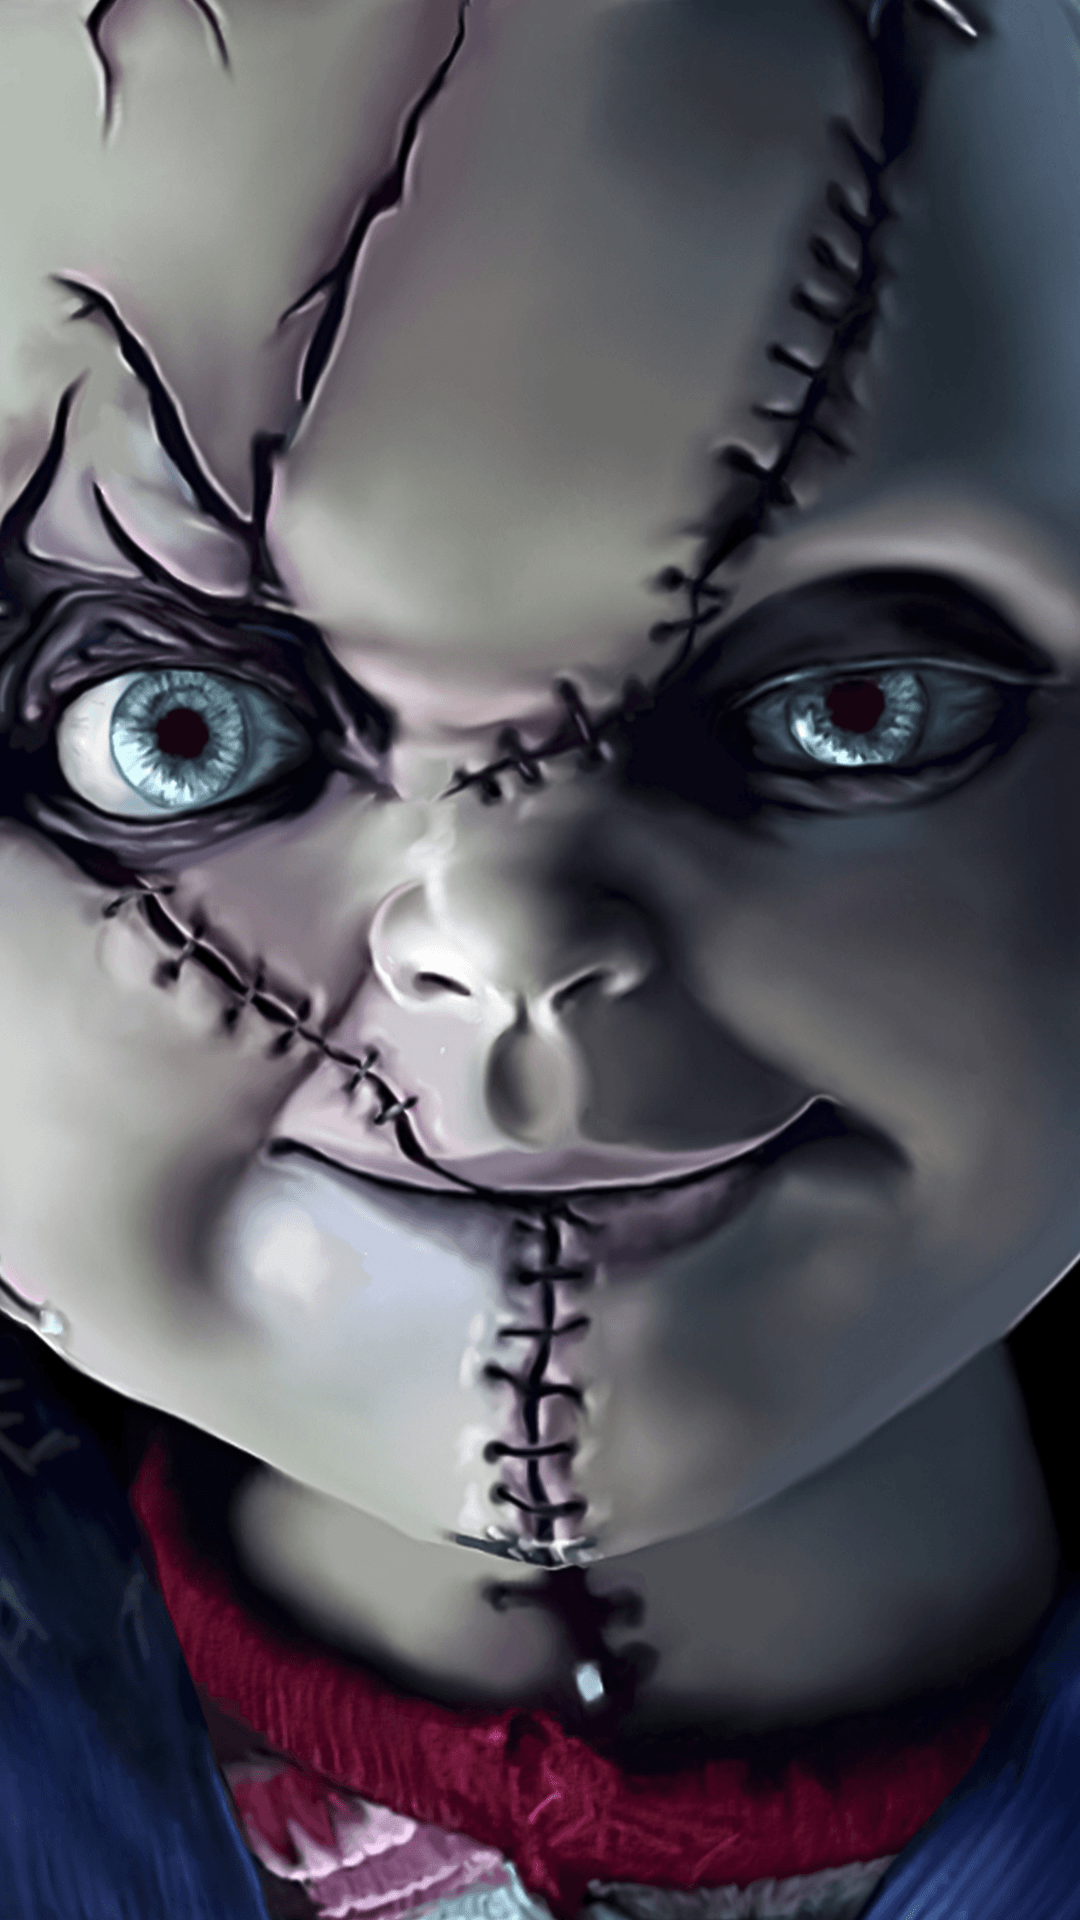 Of Chucky Wallpaper High Quality For Computer Doll Scary Nope